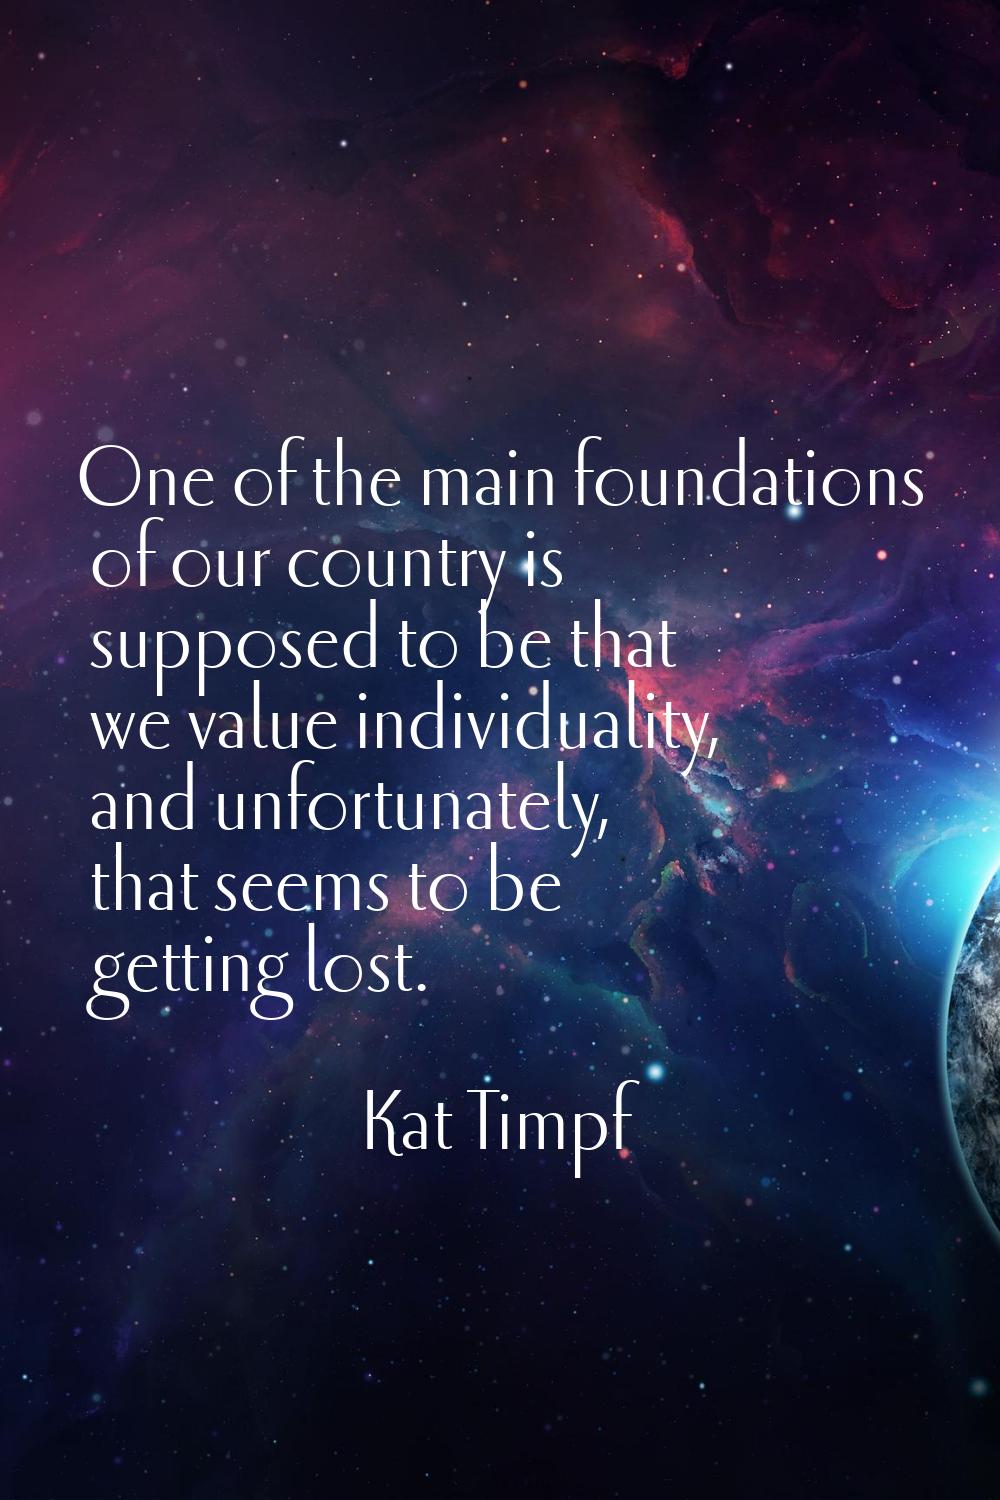 One of the main foundations of our country is supposed to be that we value individuality, and unfor